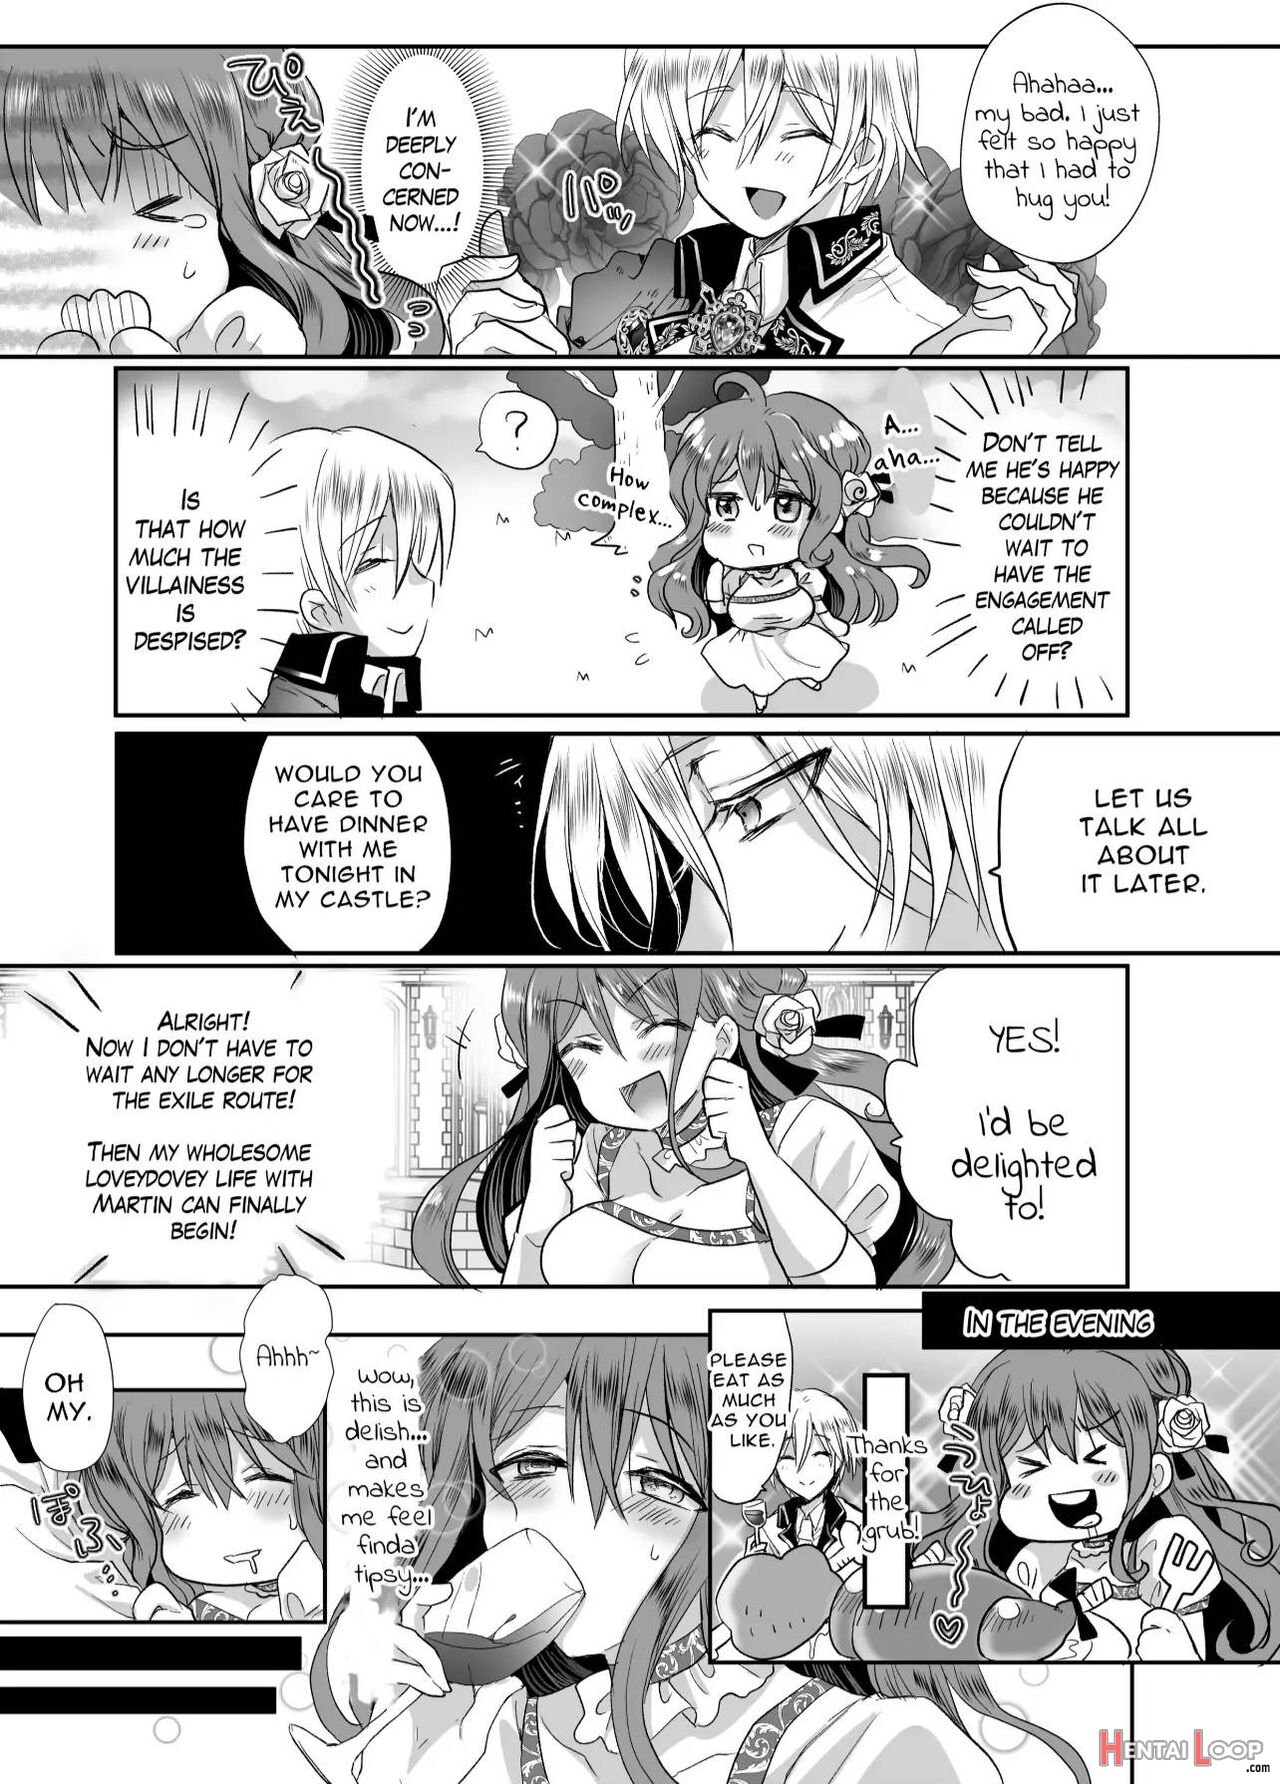  jk's Tragic Isekai Reincarnation As The Villainess ~but My Precious Side Character!~ page 24